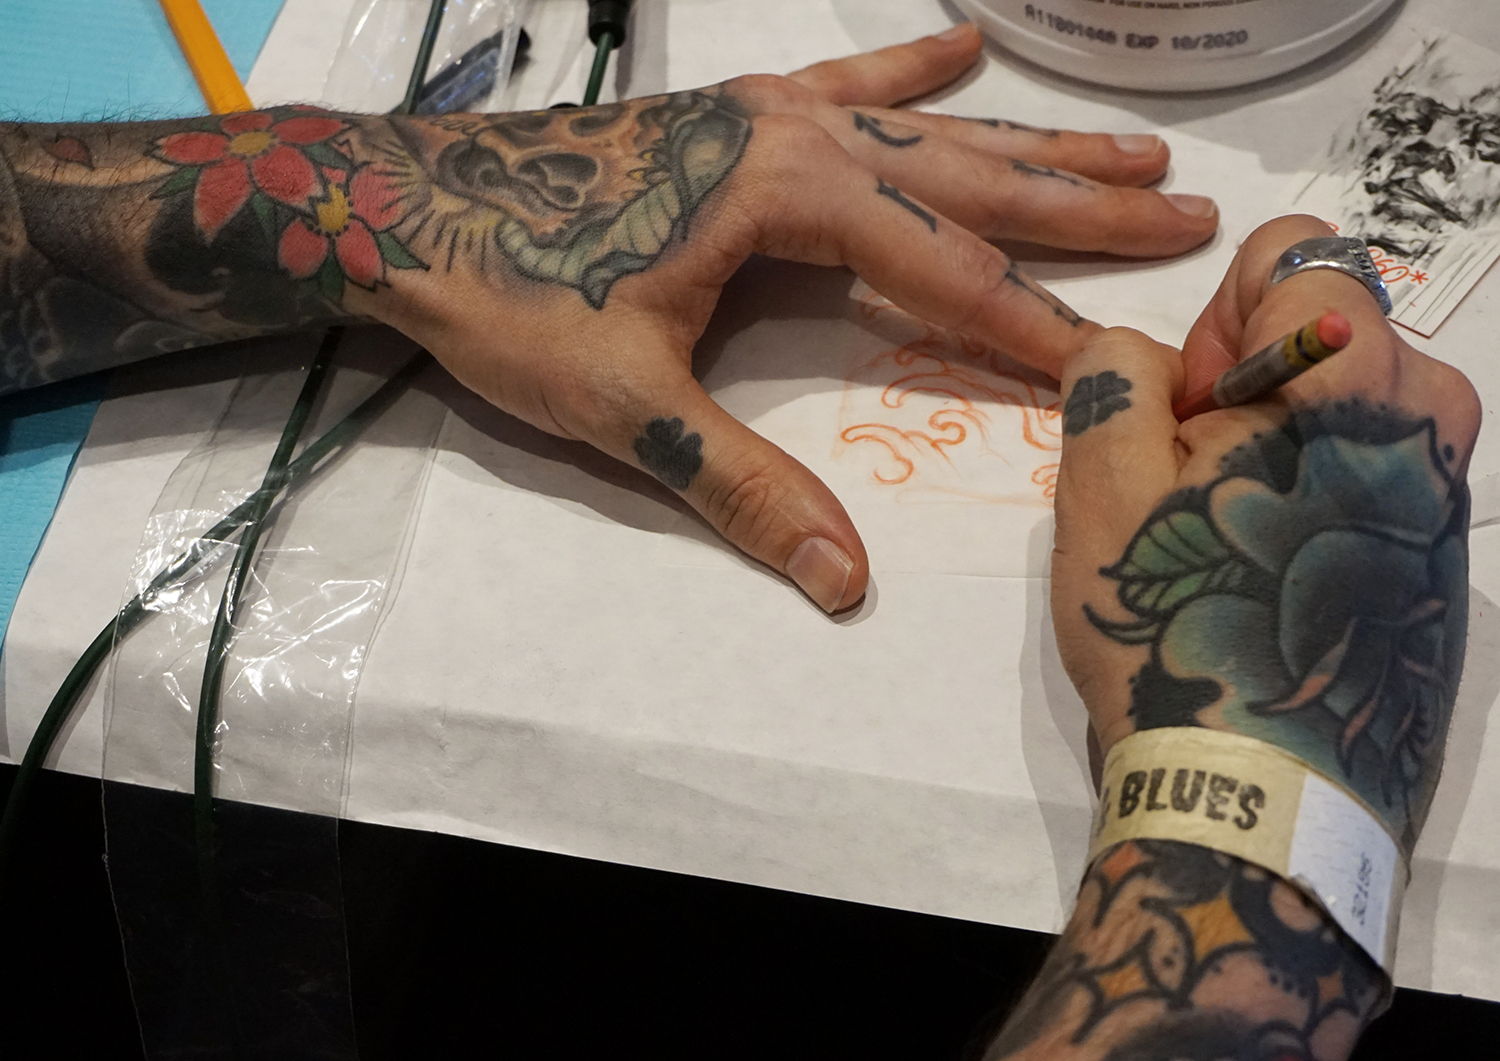 donny newman drawing an asian style tattoo on paper, santa rosa & blues event